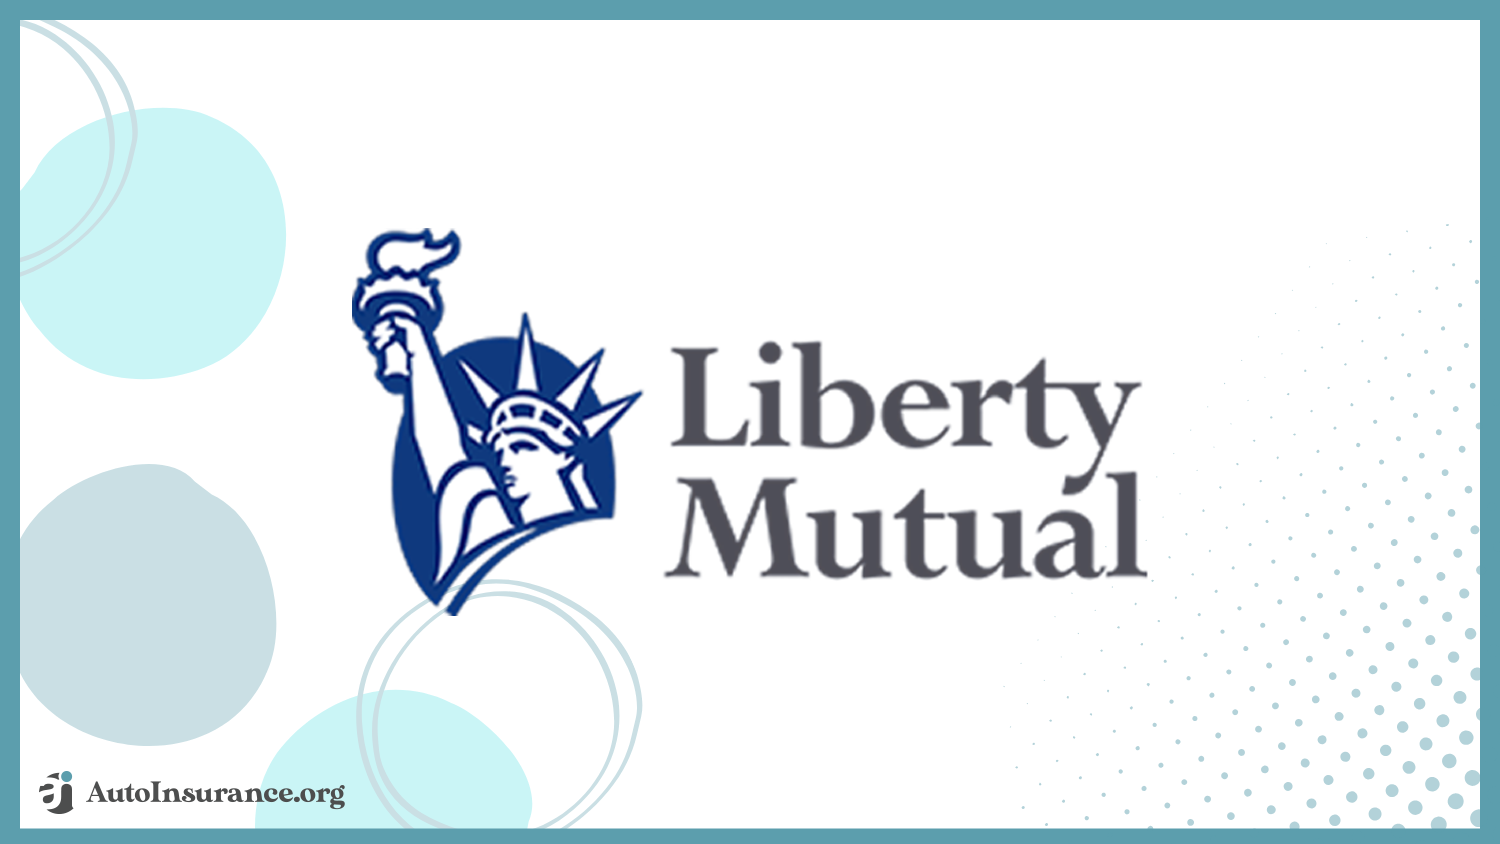 Liberty Mutual: Best Auto Insurance for Hybrid Vehicles